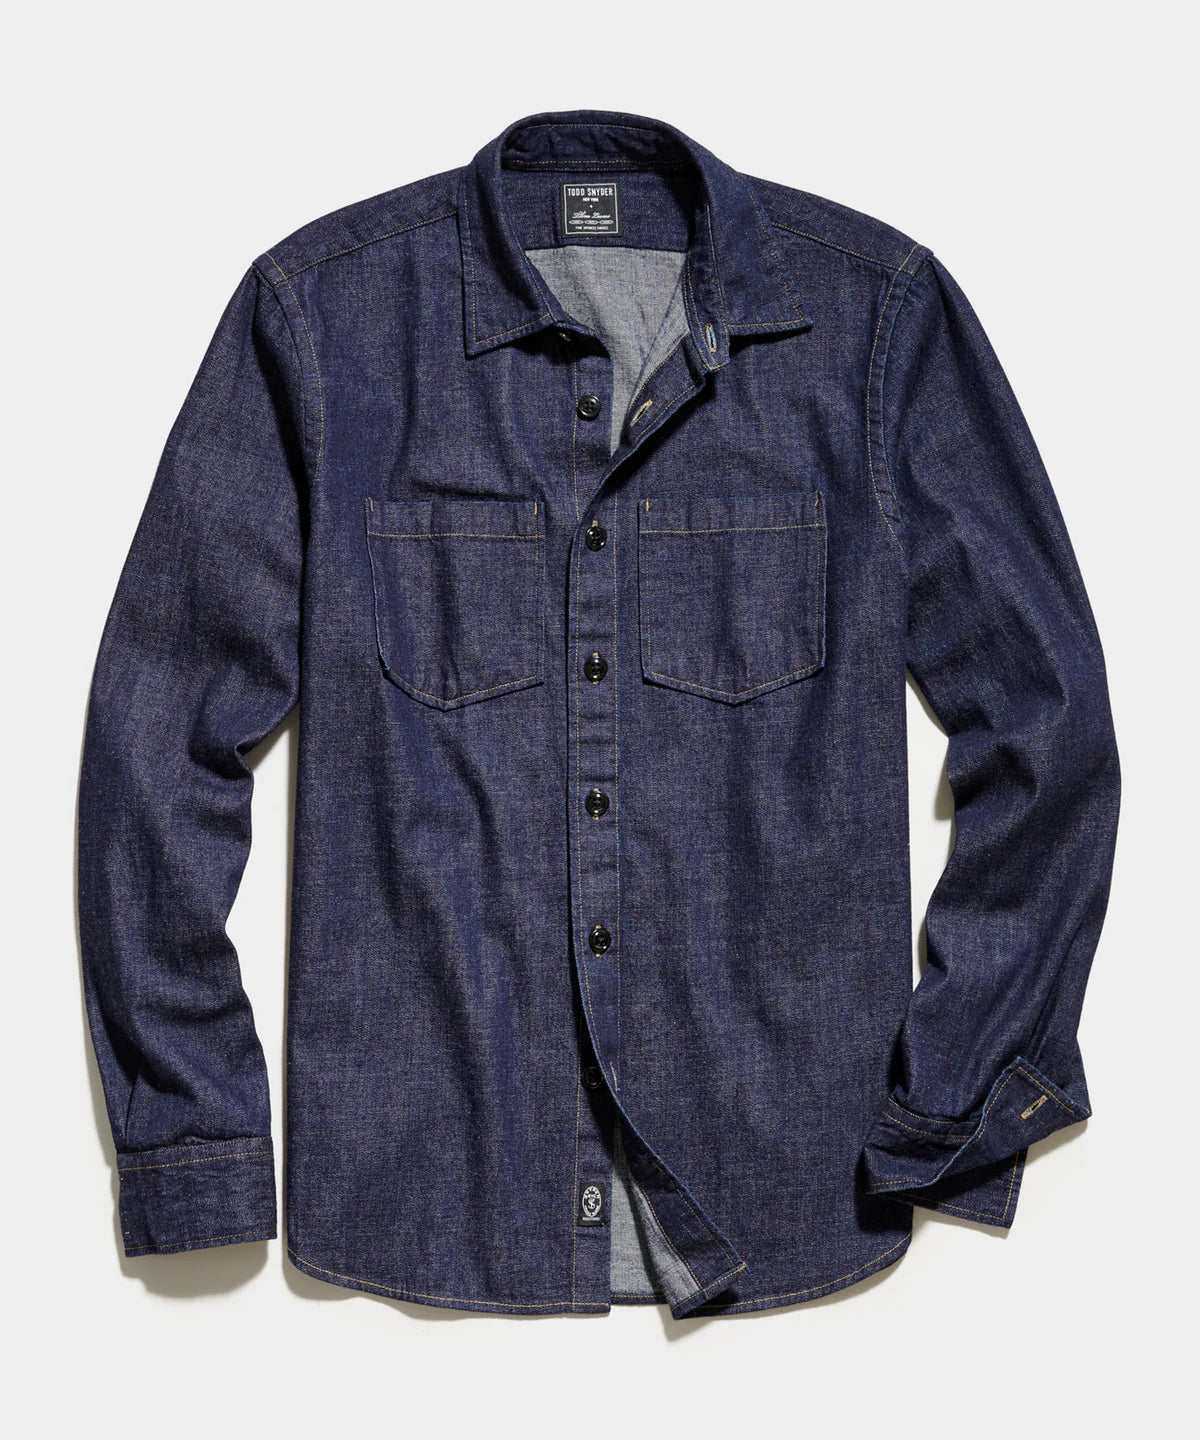 Todd Snyder - TODD SNYDER JAPANESE RAW SELVEDGE OVERSHIRT IN INDIGO - Rent With Thred